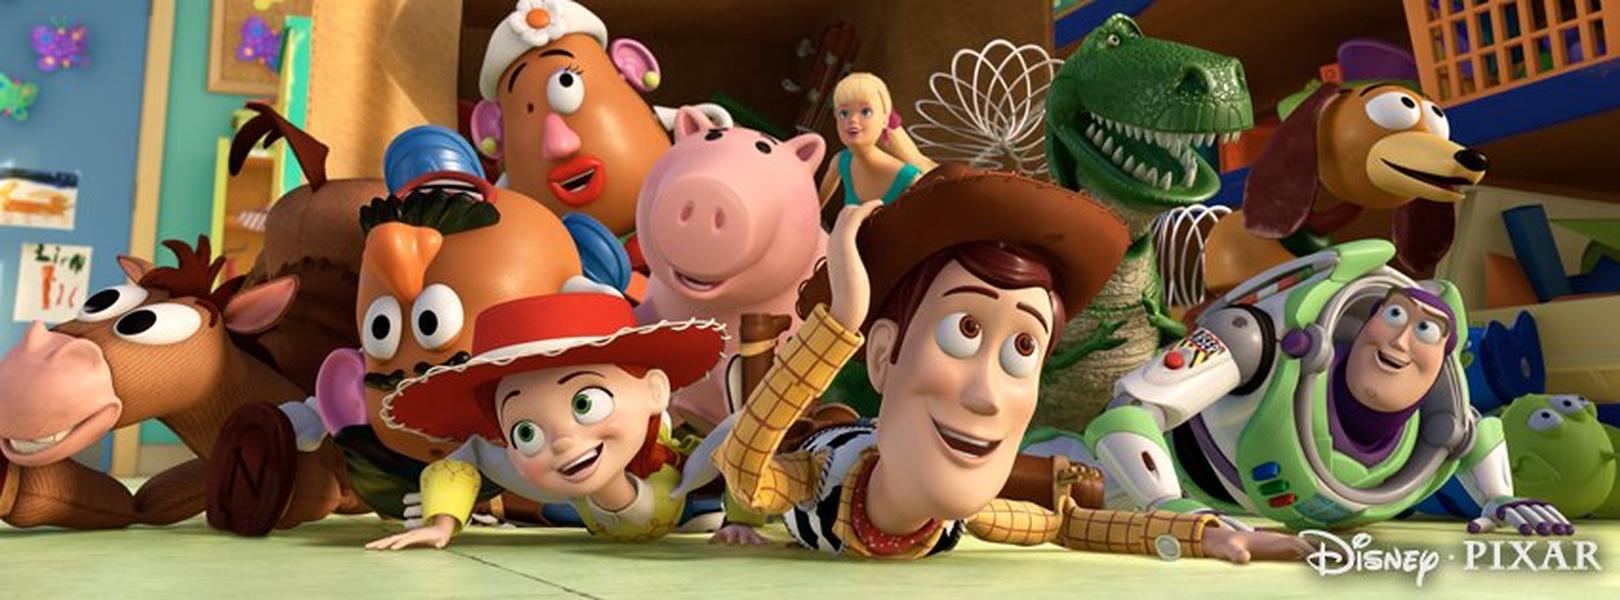 Toy Story 4 is coming in 2017